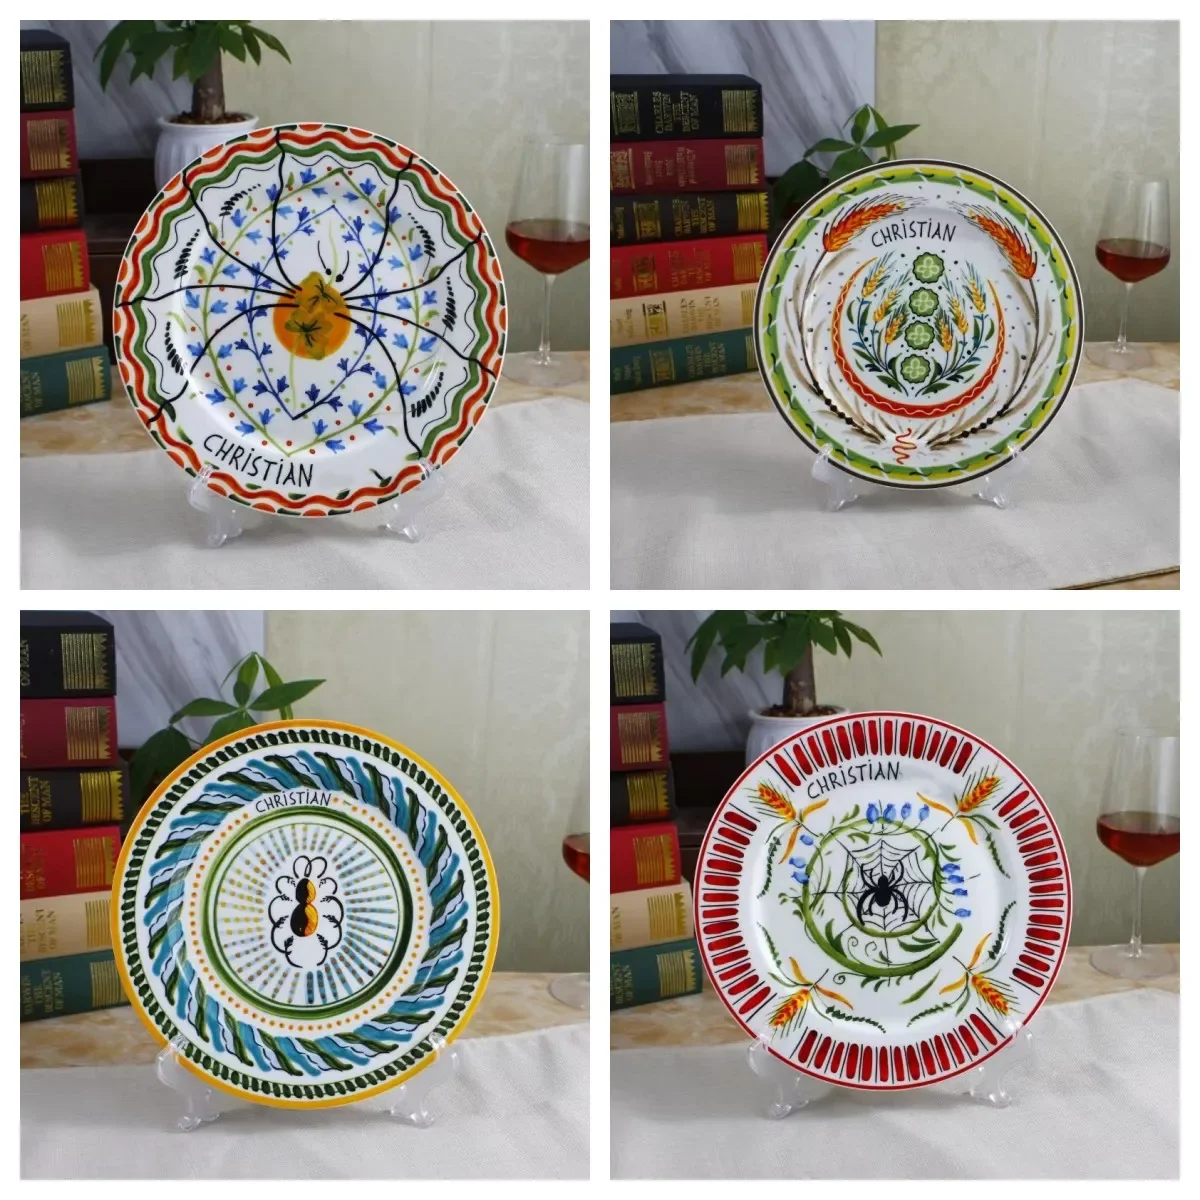 

4 PCs European Style Plant Flower Ceramic Plate Tableware Suit Mug Coffee Set Decorative Tray Dinner Set Plates and Dishes